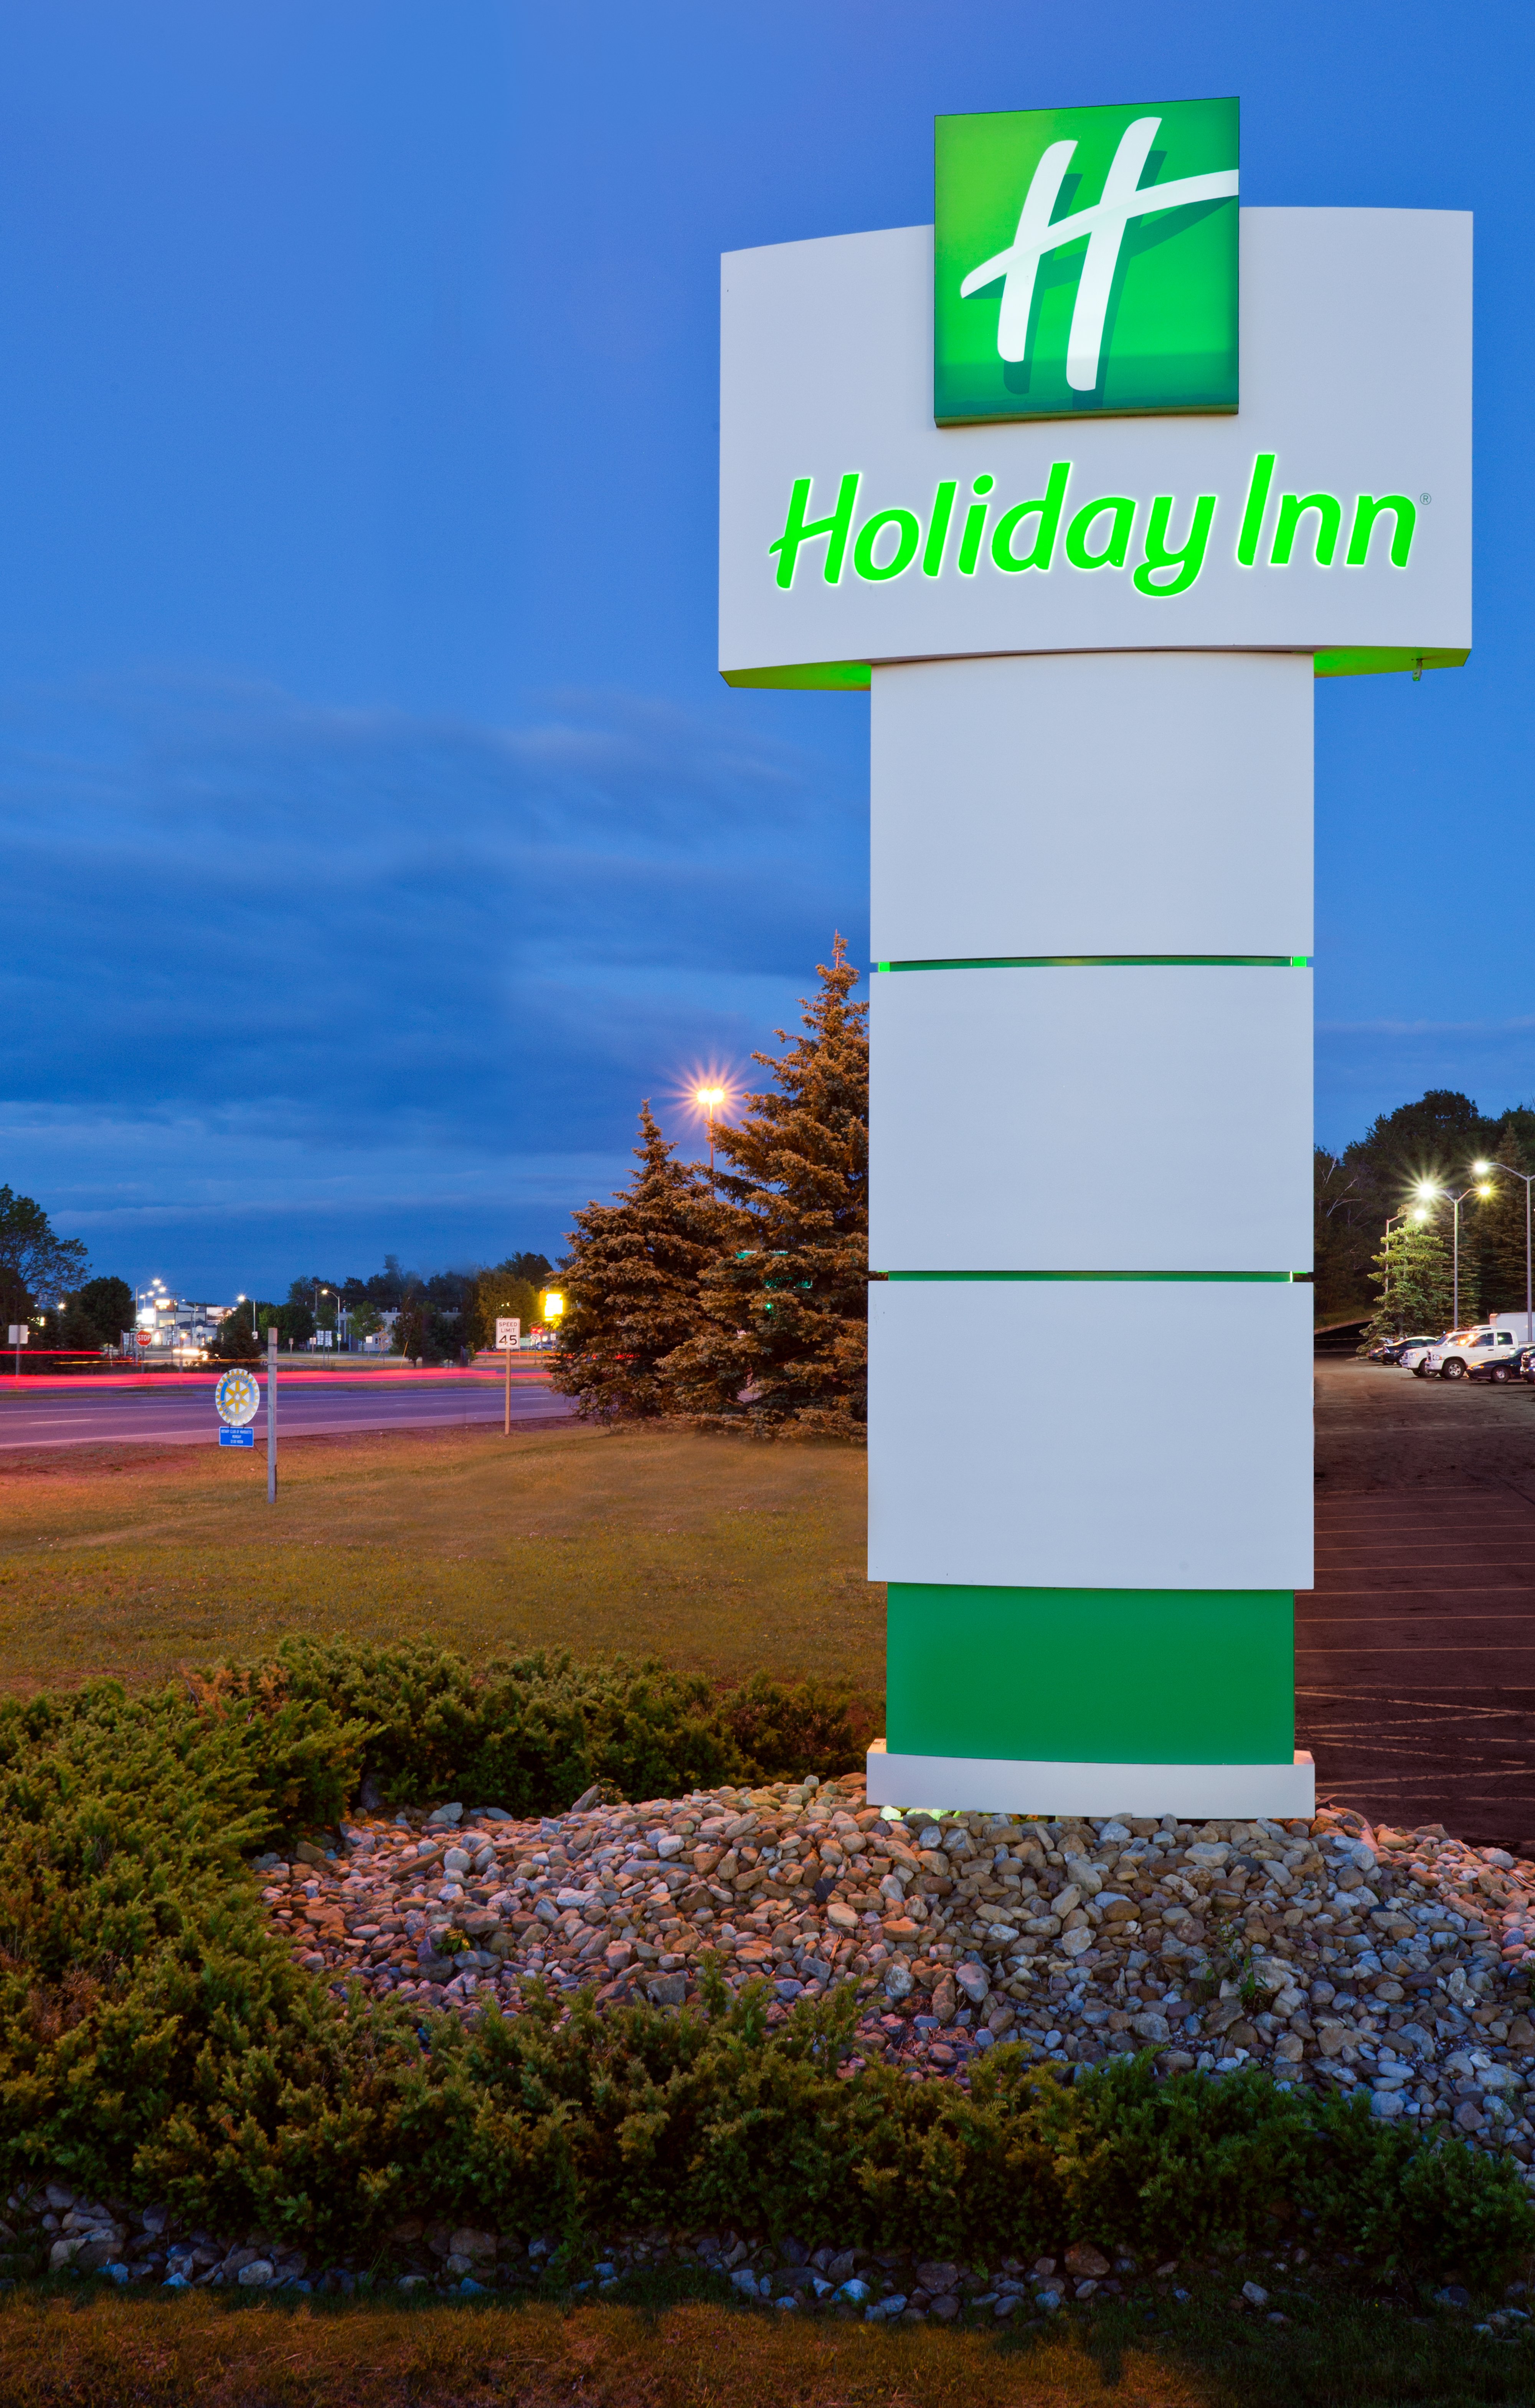 Welcome to the Holiday Inn of Marquette Michigan